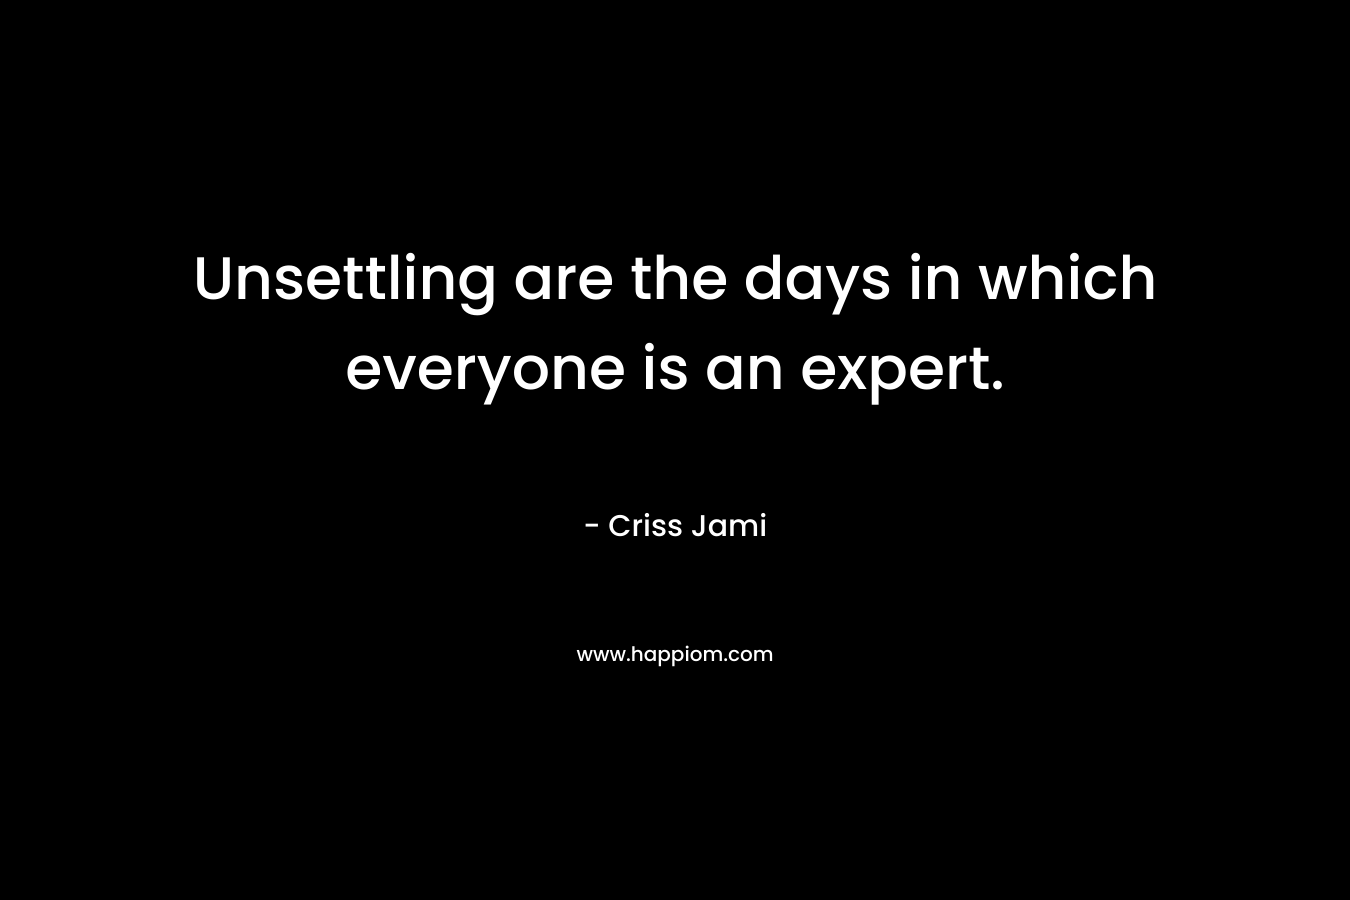 Unsettling are the days in which everyone is an expert.